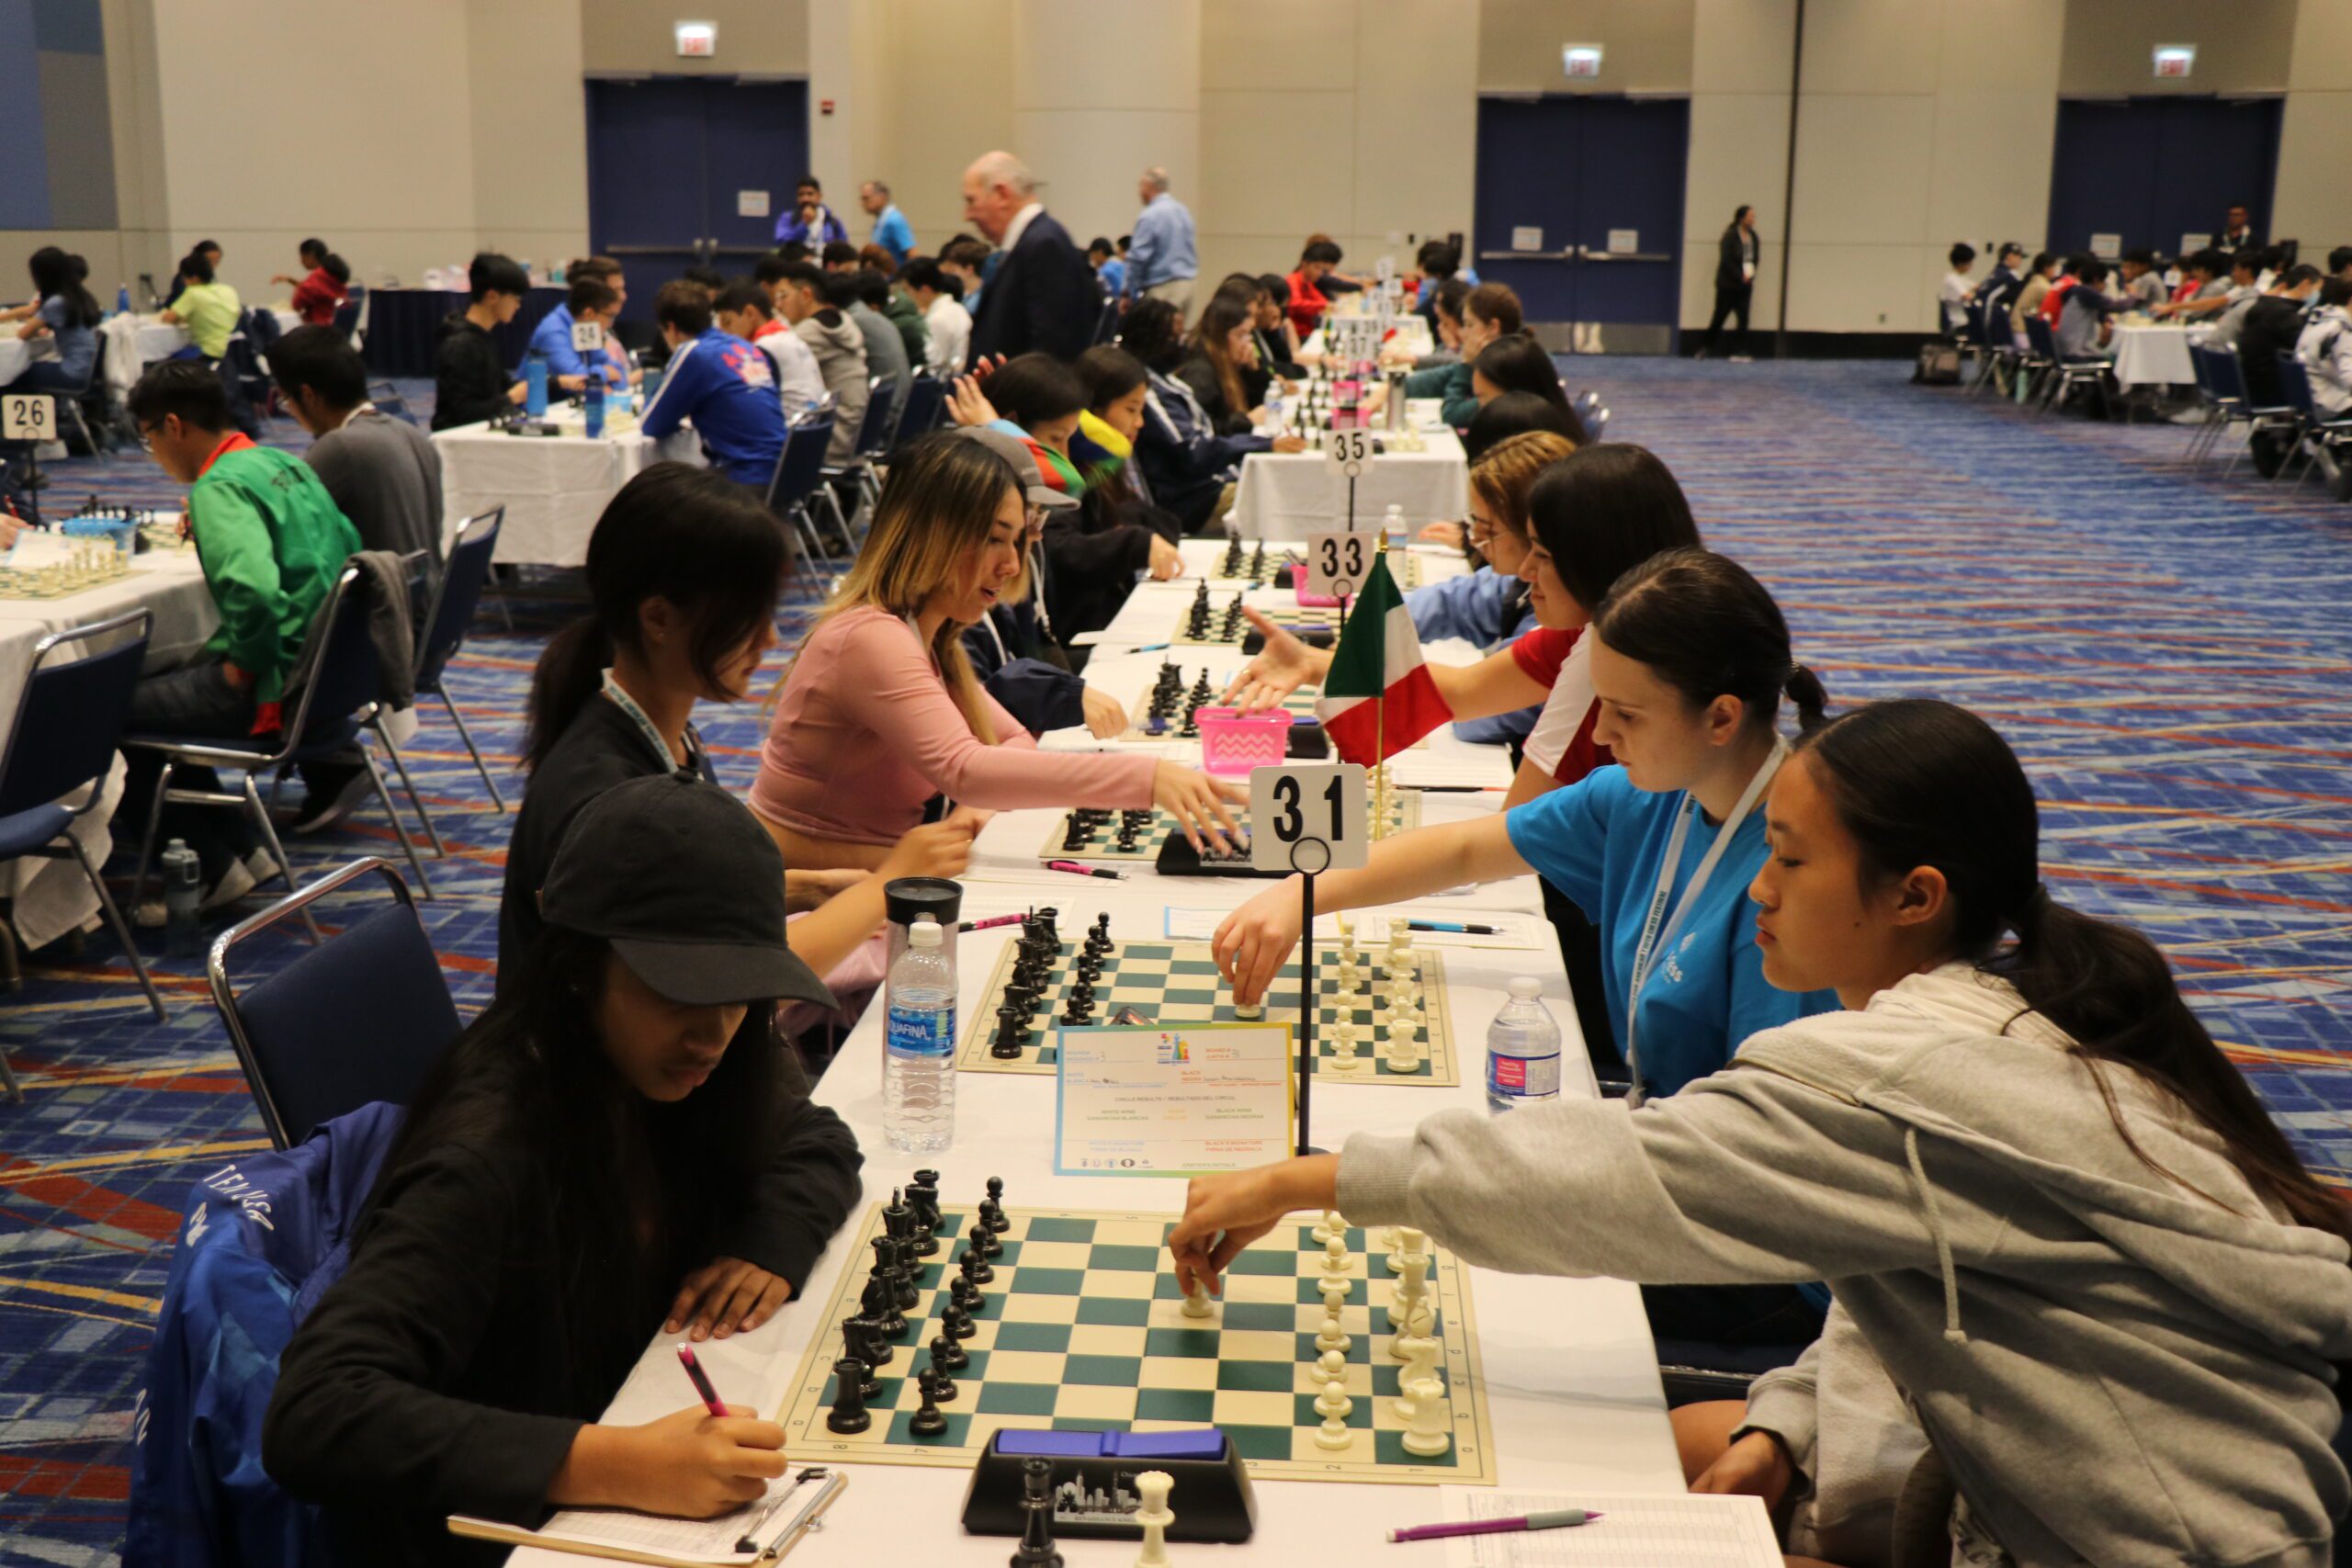 Flash Report: U.S.A. Takes Gold at XXXIII Pan-American Youth Chess Festival